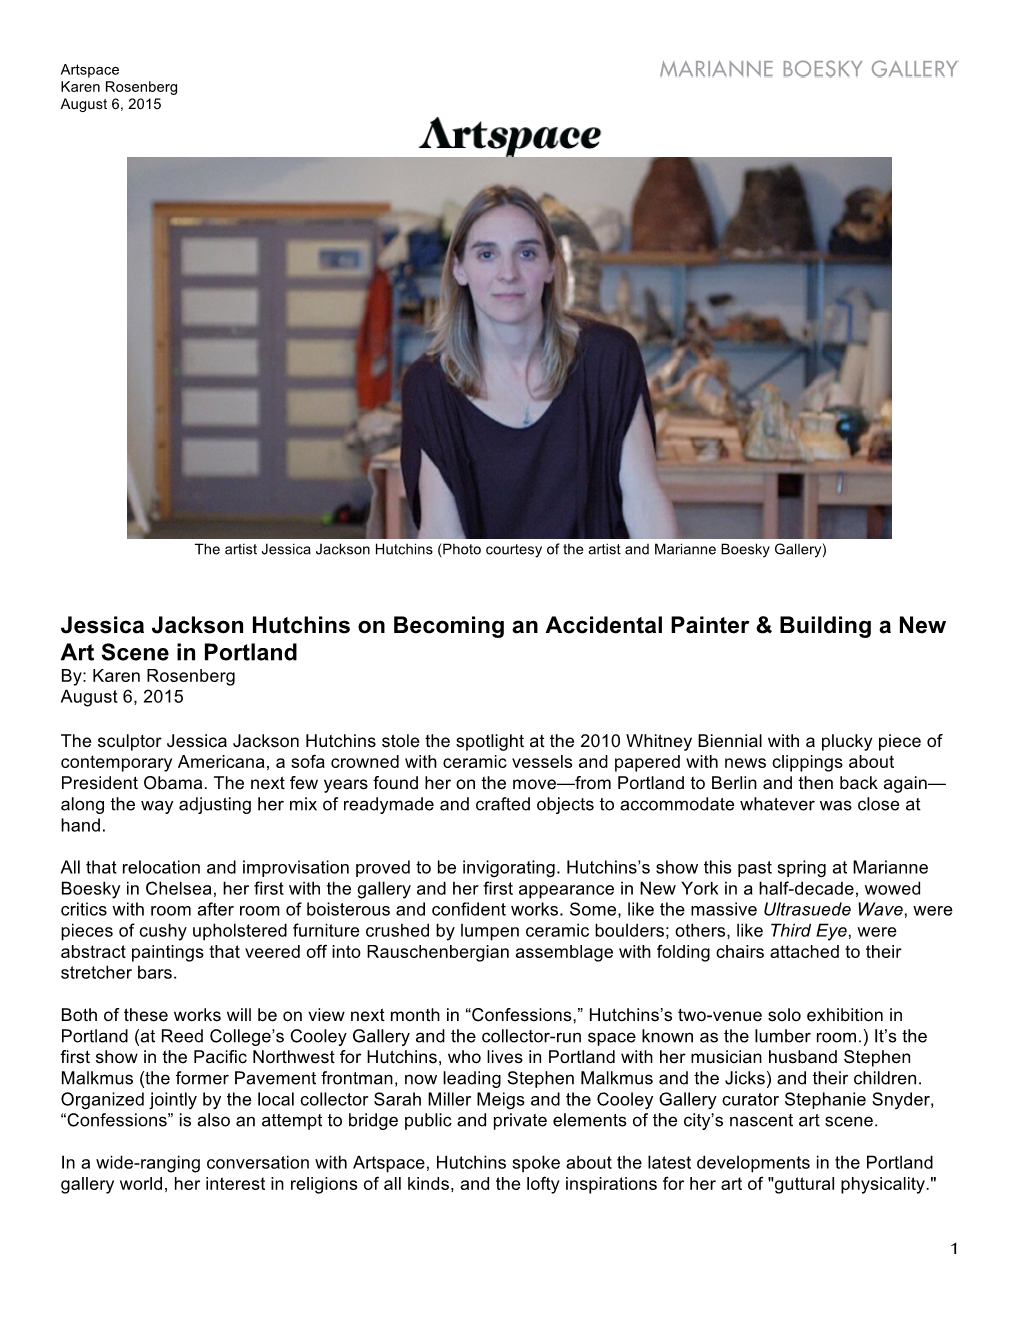 Jessica Jackson Hutchins on Becoming an Accidental Painter & Building a New Art Scene in Portland By: Karen Rosenberg August 6, 2015